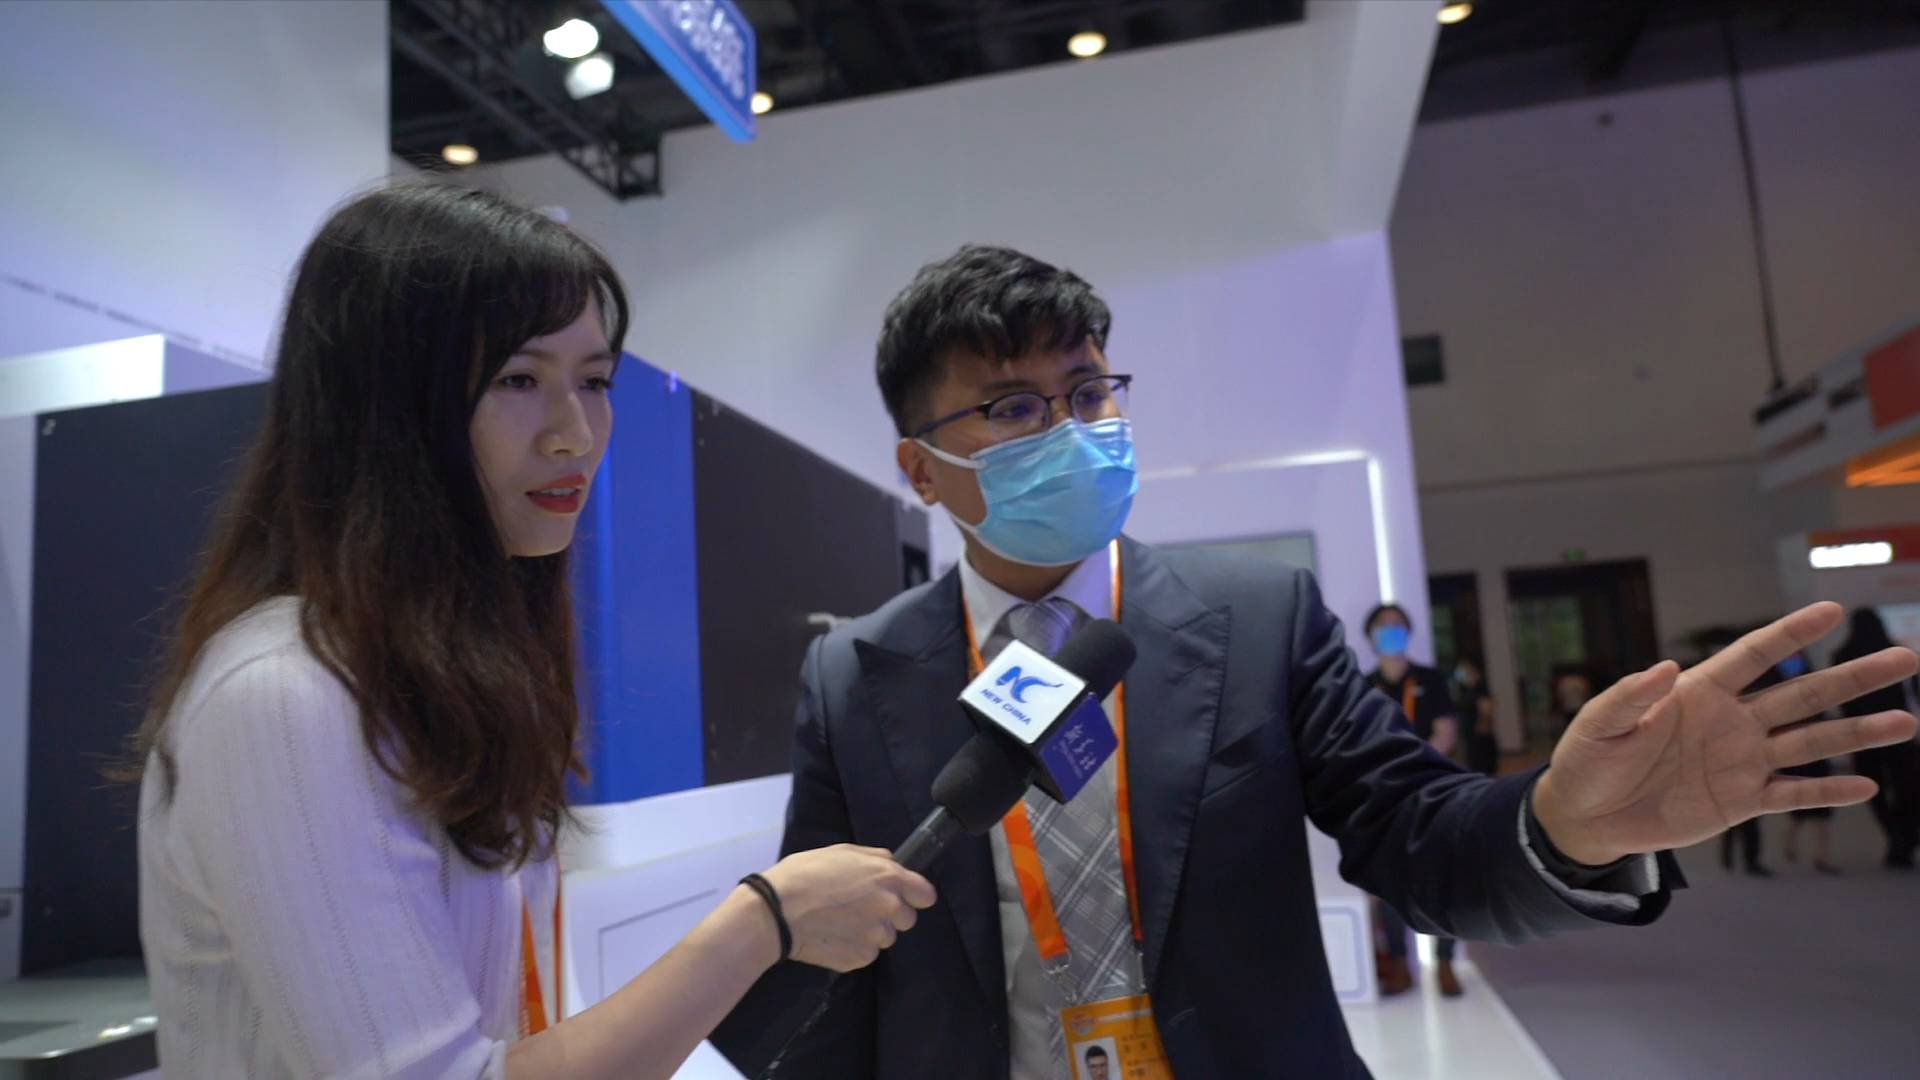 GLOBALink | A glimpse of sustainable paper recycling technology at China's services trade fair